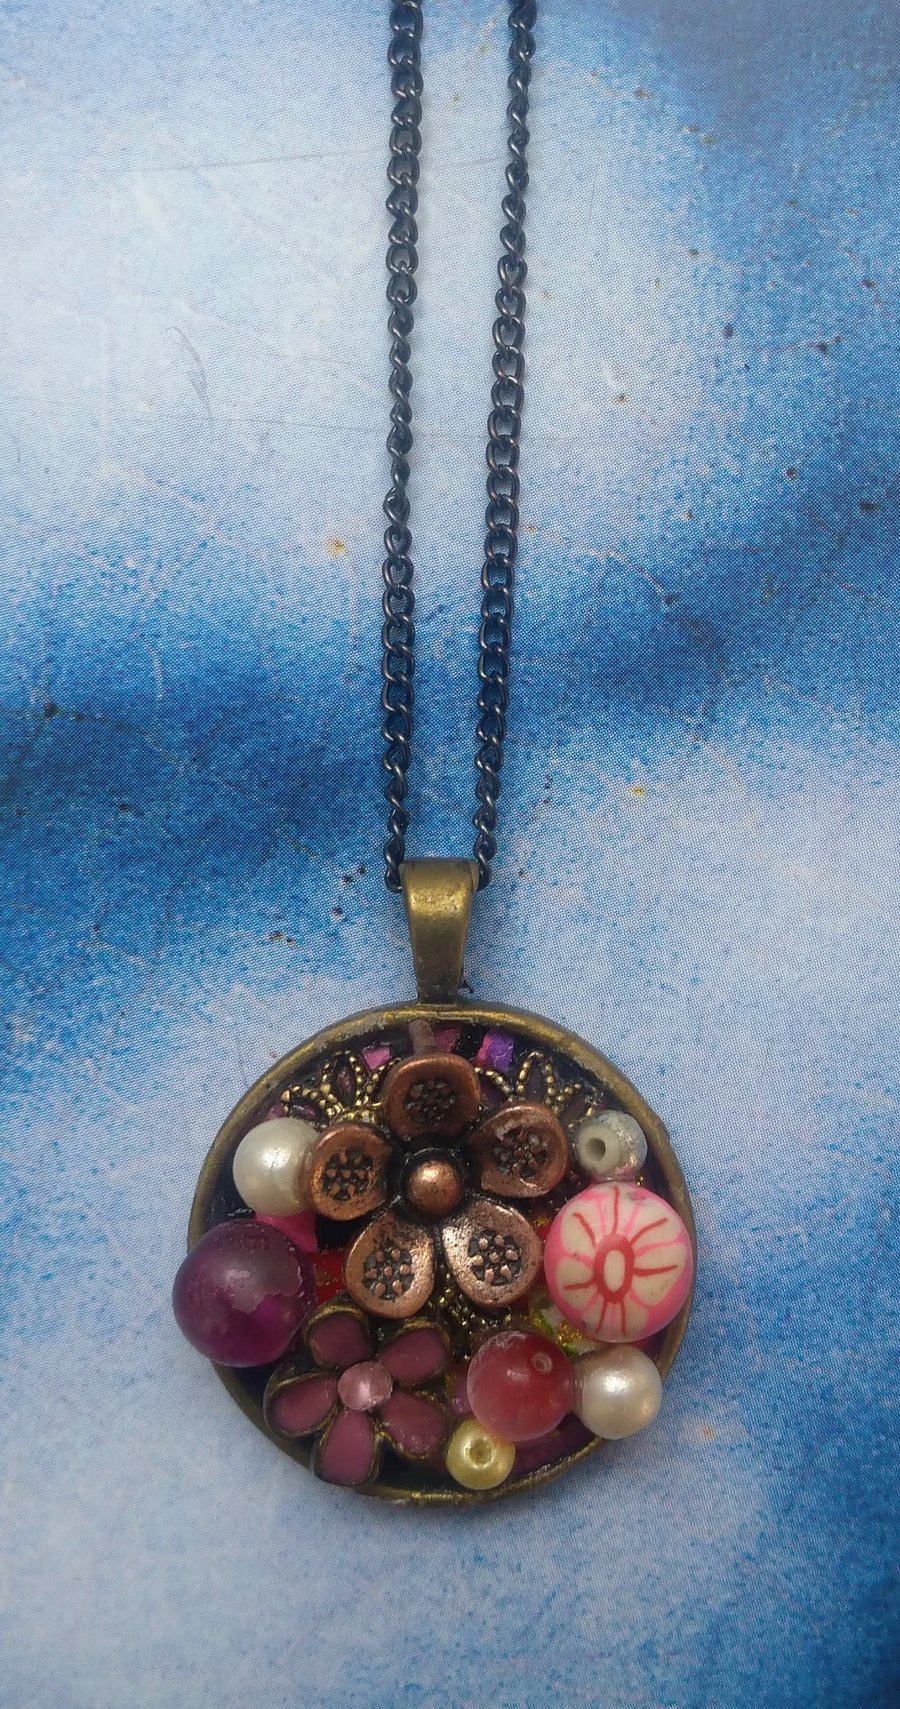 Pink and Old Bronzey Coppery Flowers in a Bejewelled Pendant